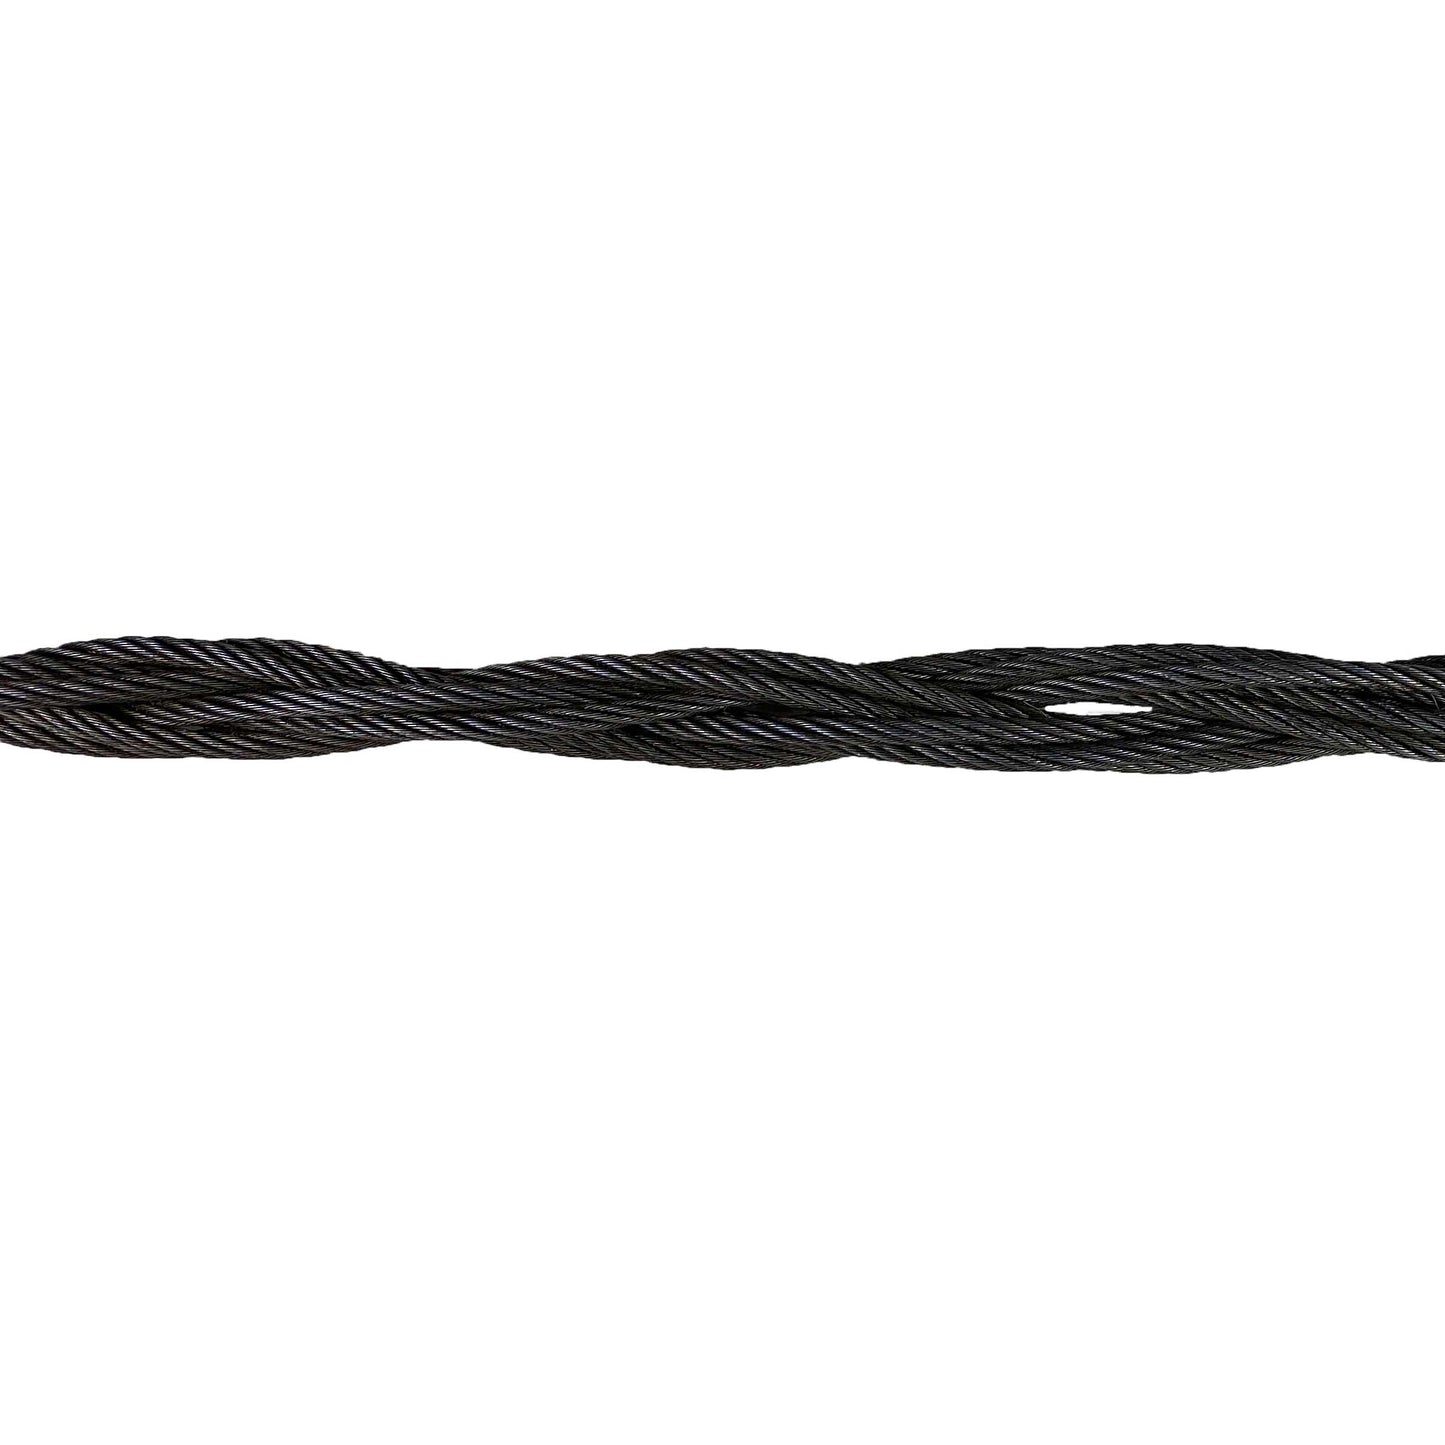 12 inch x 6 foot Eight Part Braided Wire Rope Sling image 3 of 3